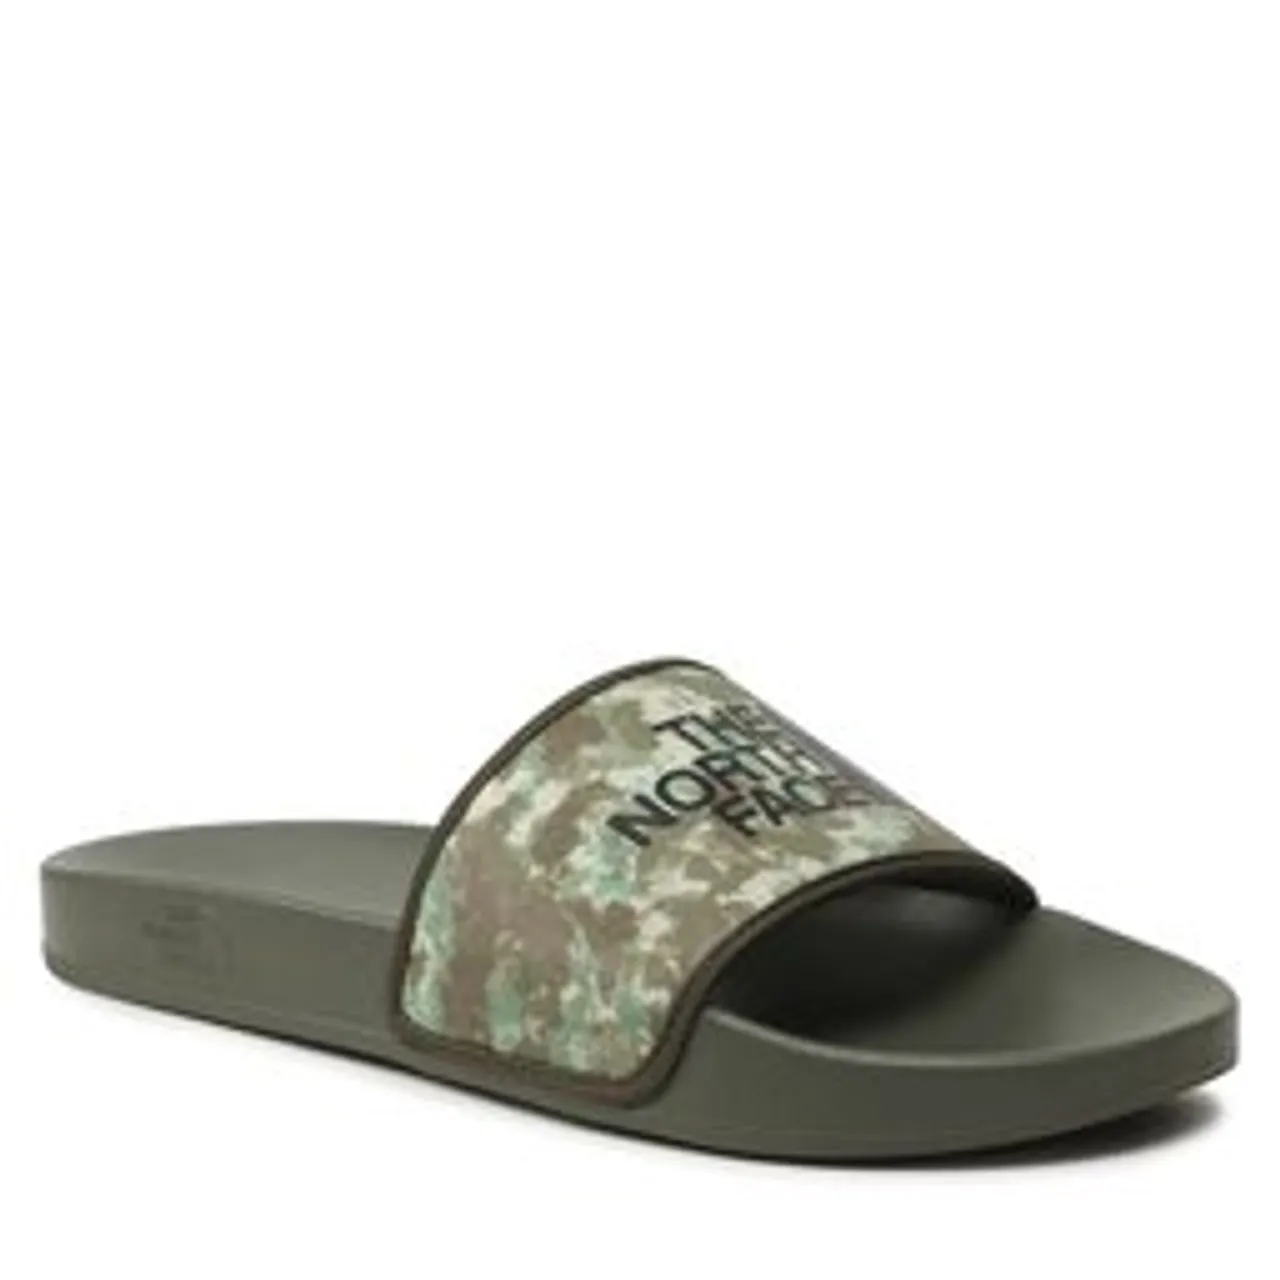 Pantoletten The North Face M Base Camp Slide Iii NF0A4T2RIYL1 Military Olive Stippled Camo Print/Tnf Black